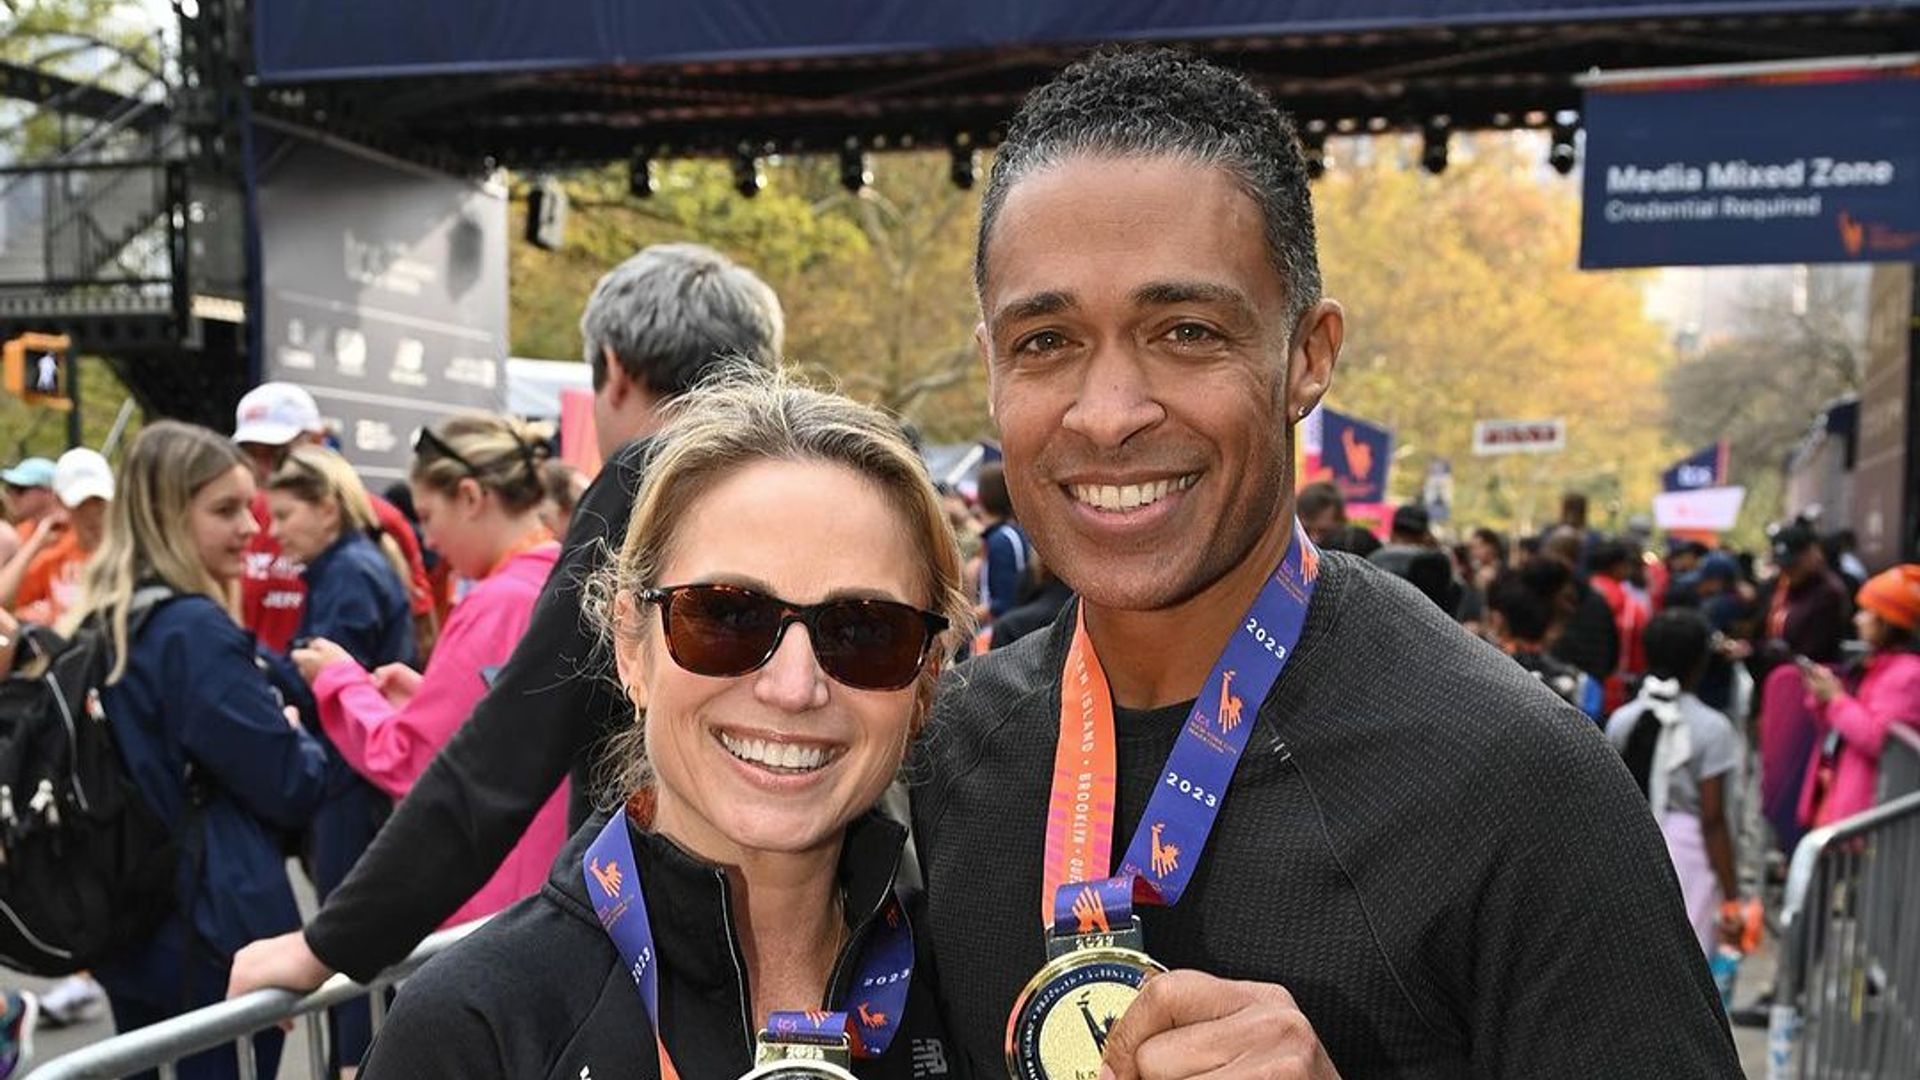 T.J. Holmes and Amy Robach at the New York Marathon